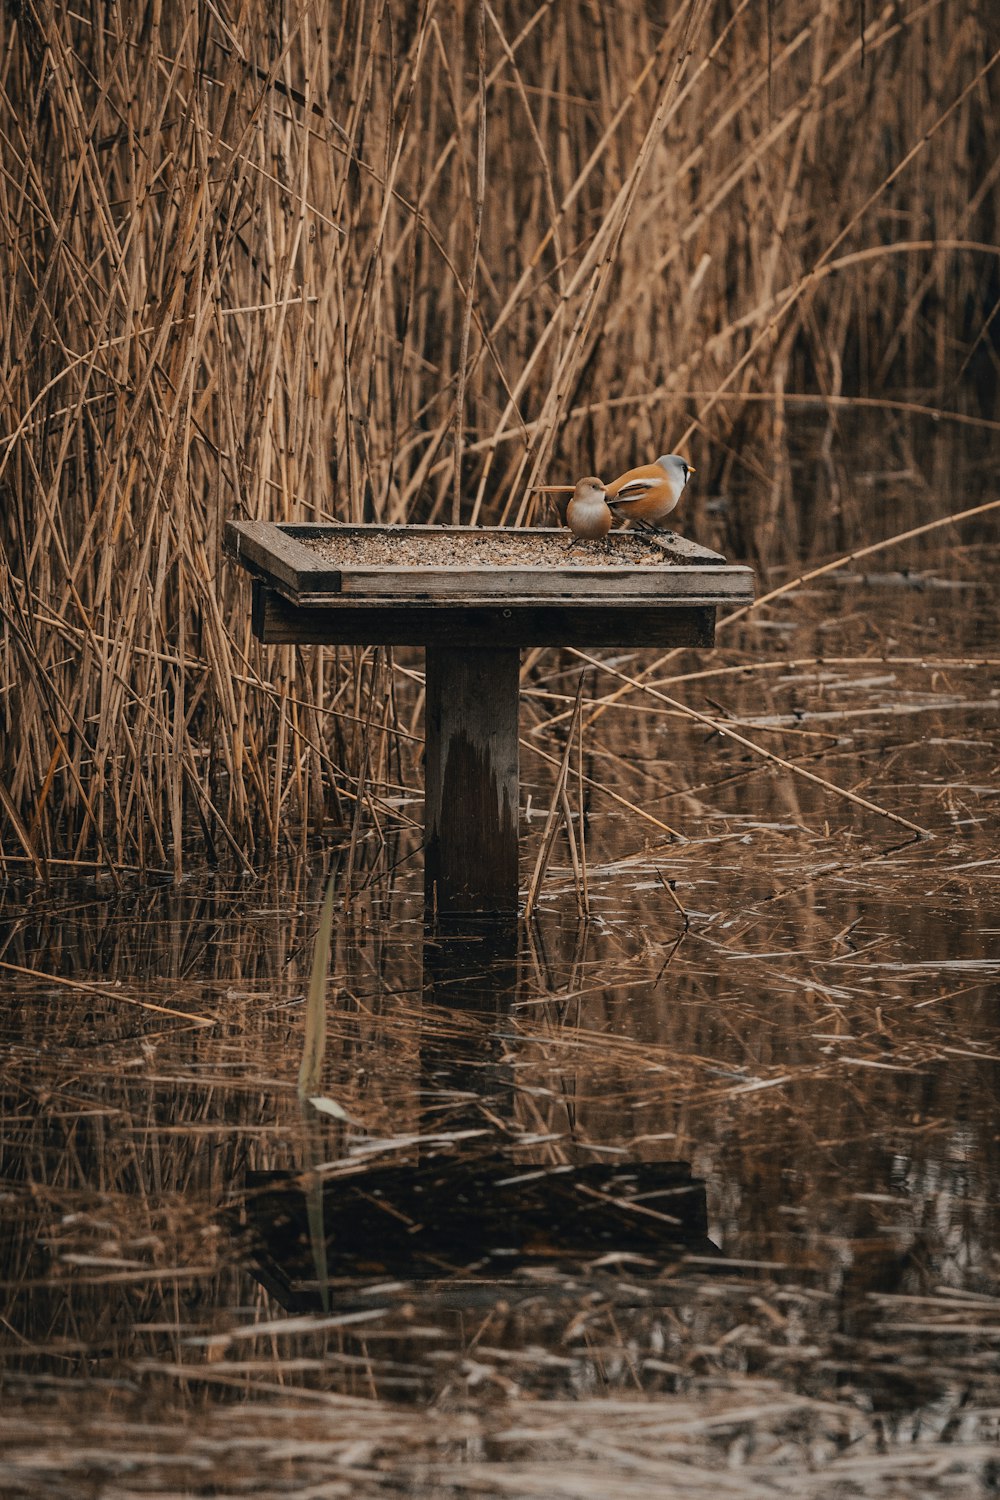 a bird is sitting on a wooden bench in the water